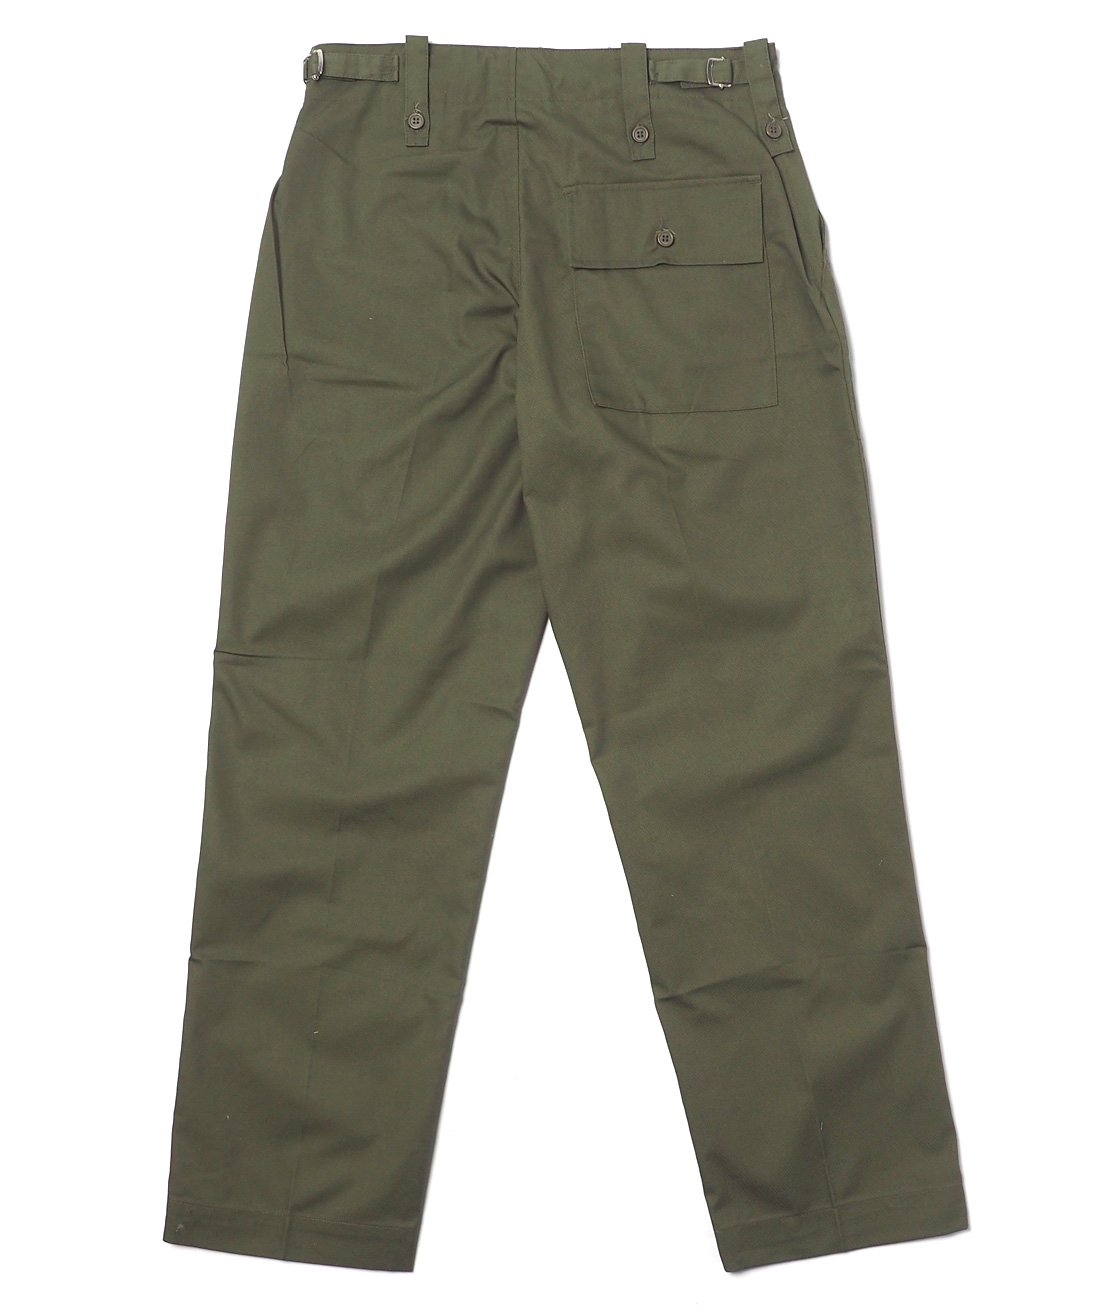 DEAD STOCK】BRITISH ARMY LIGHTWEIGHT TROUSERS - OLIVE イギリス軍